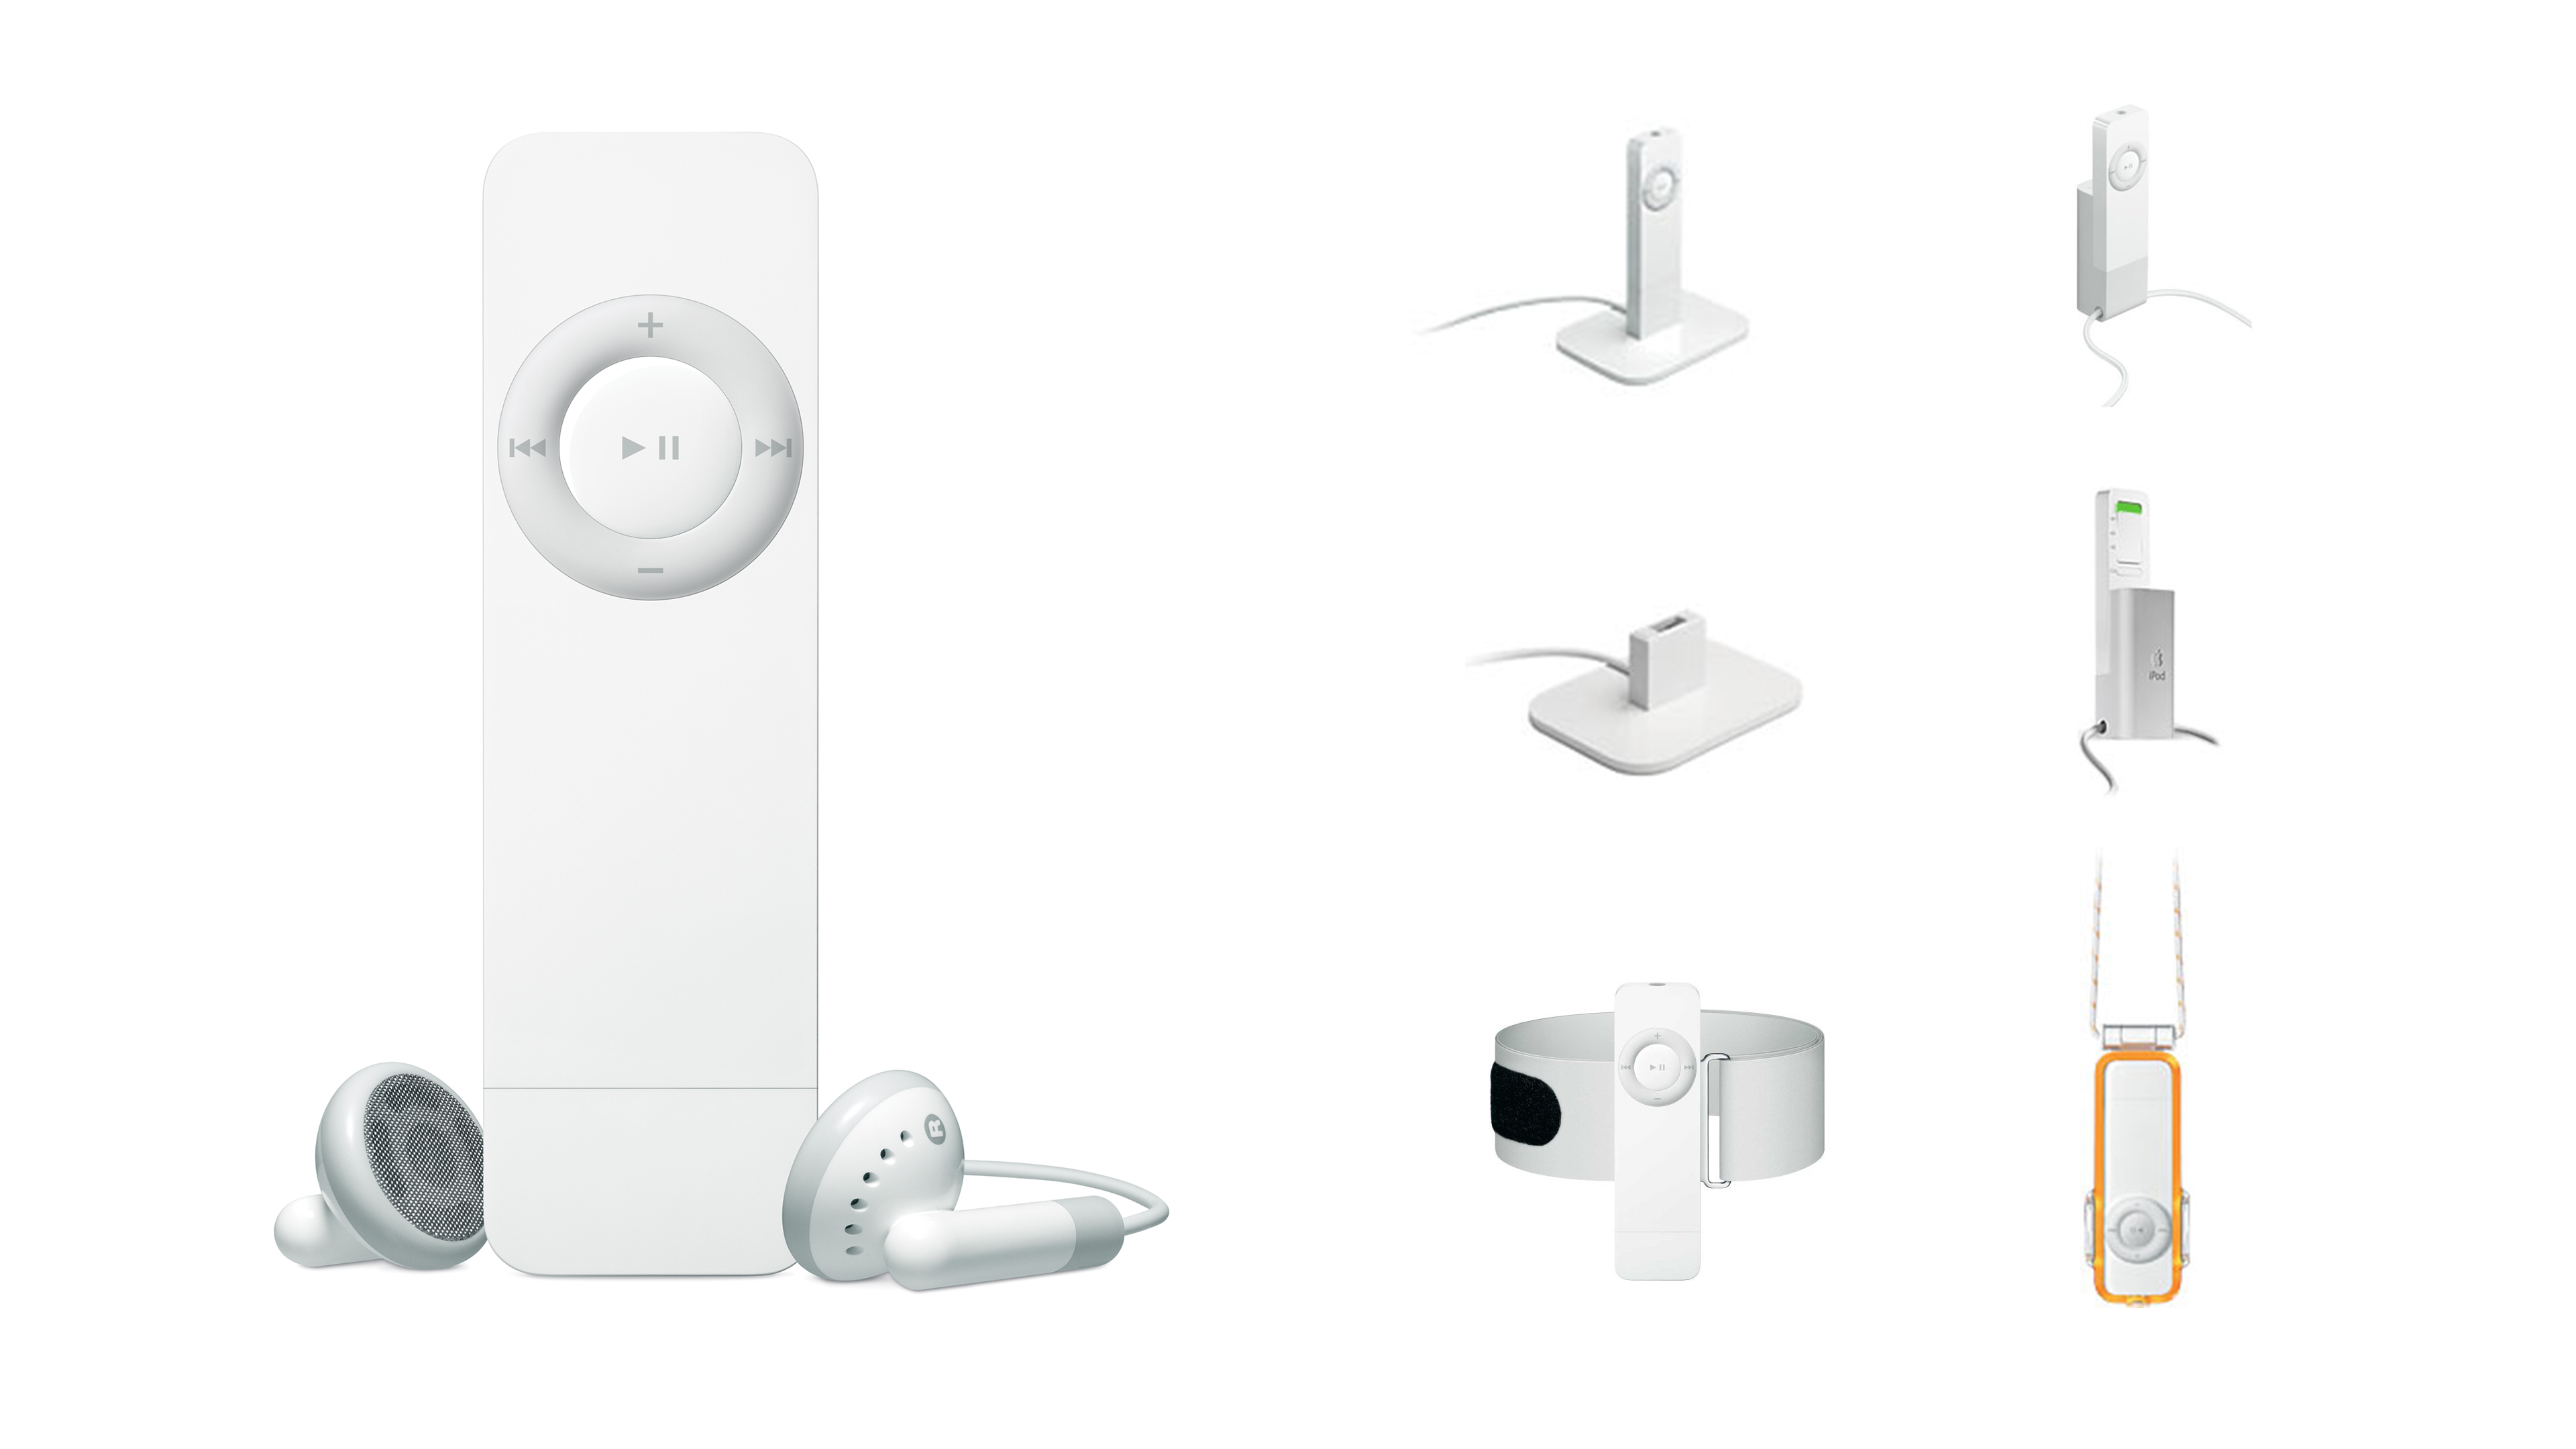 ipod shuffle docking station with speakers